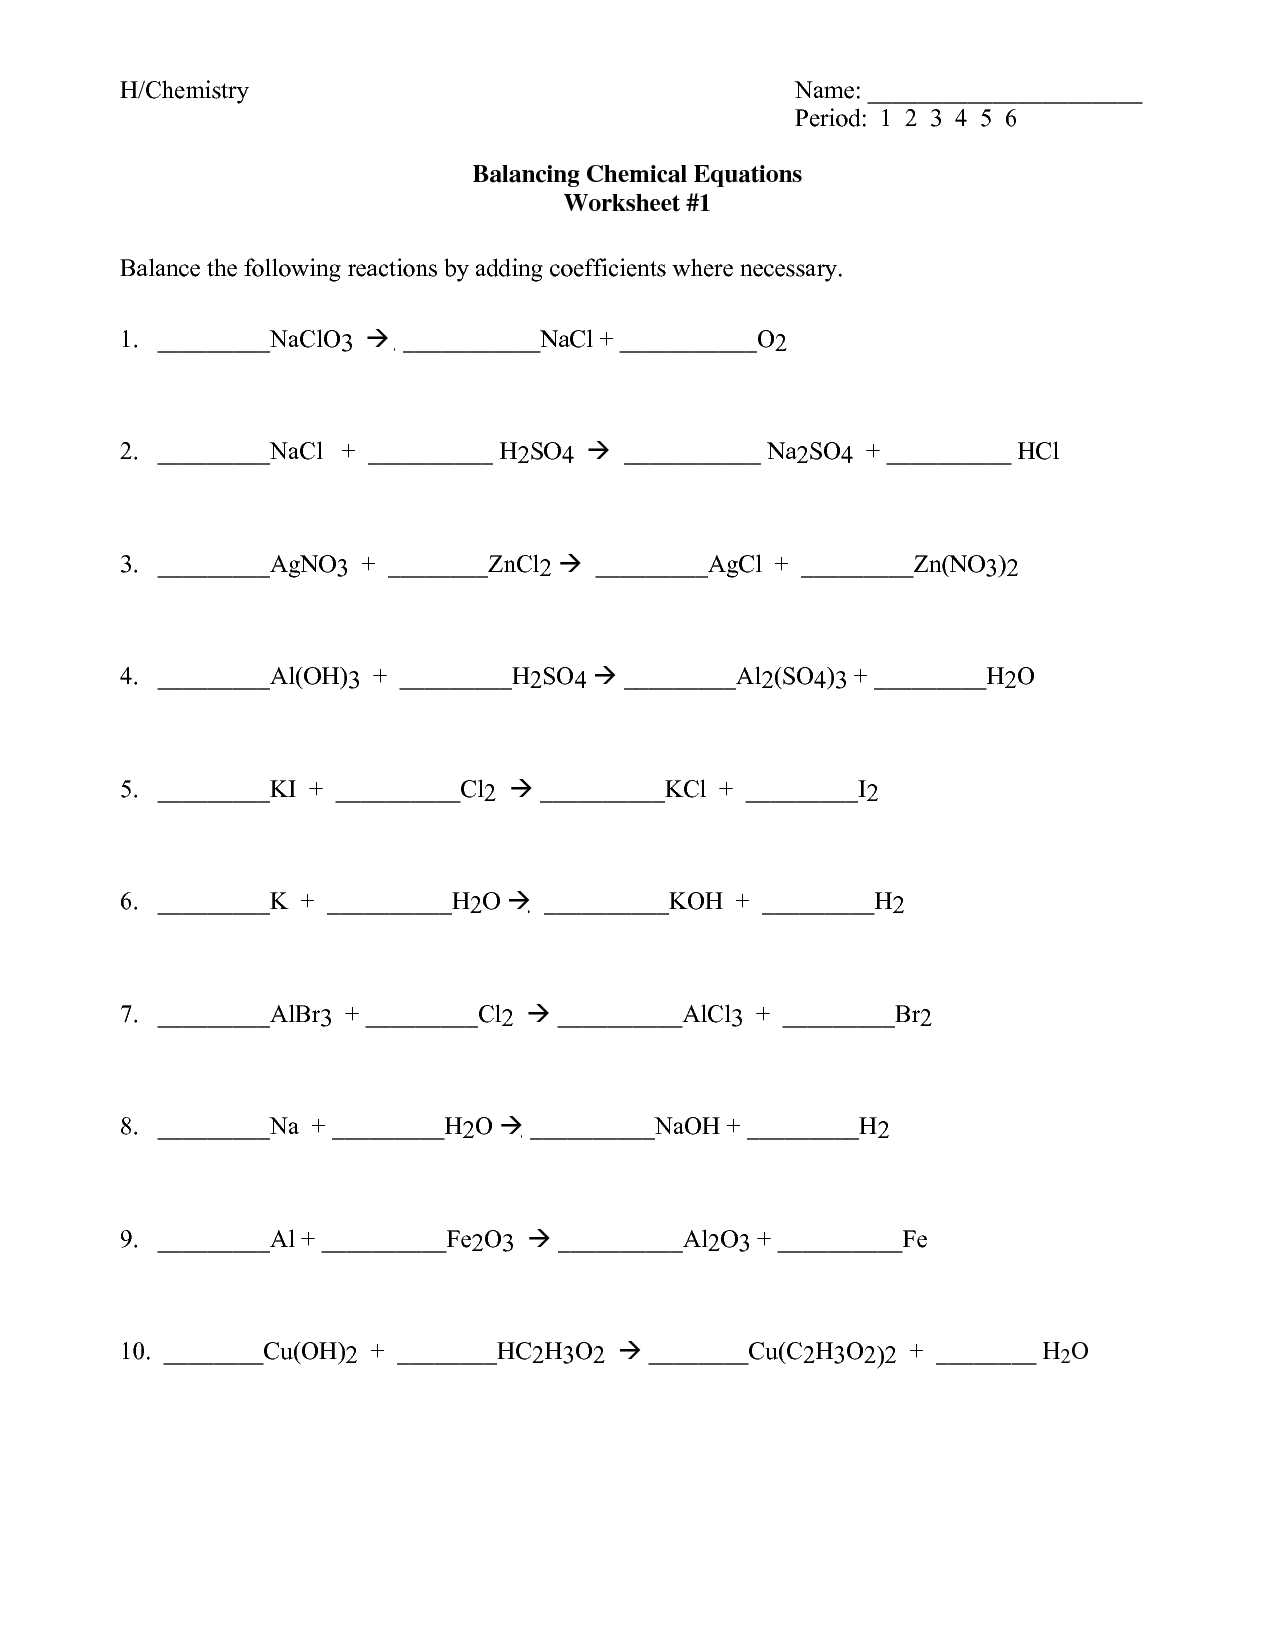 Chemical Reaction Worksheet Answers together with Unbalanced Chemical Equations Worksheet the Best Worksheets Image